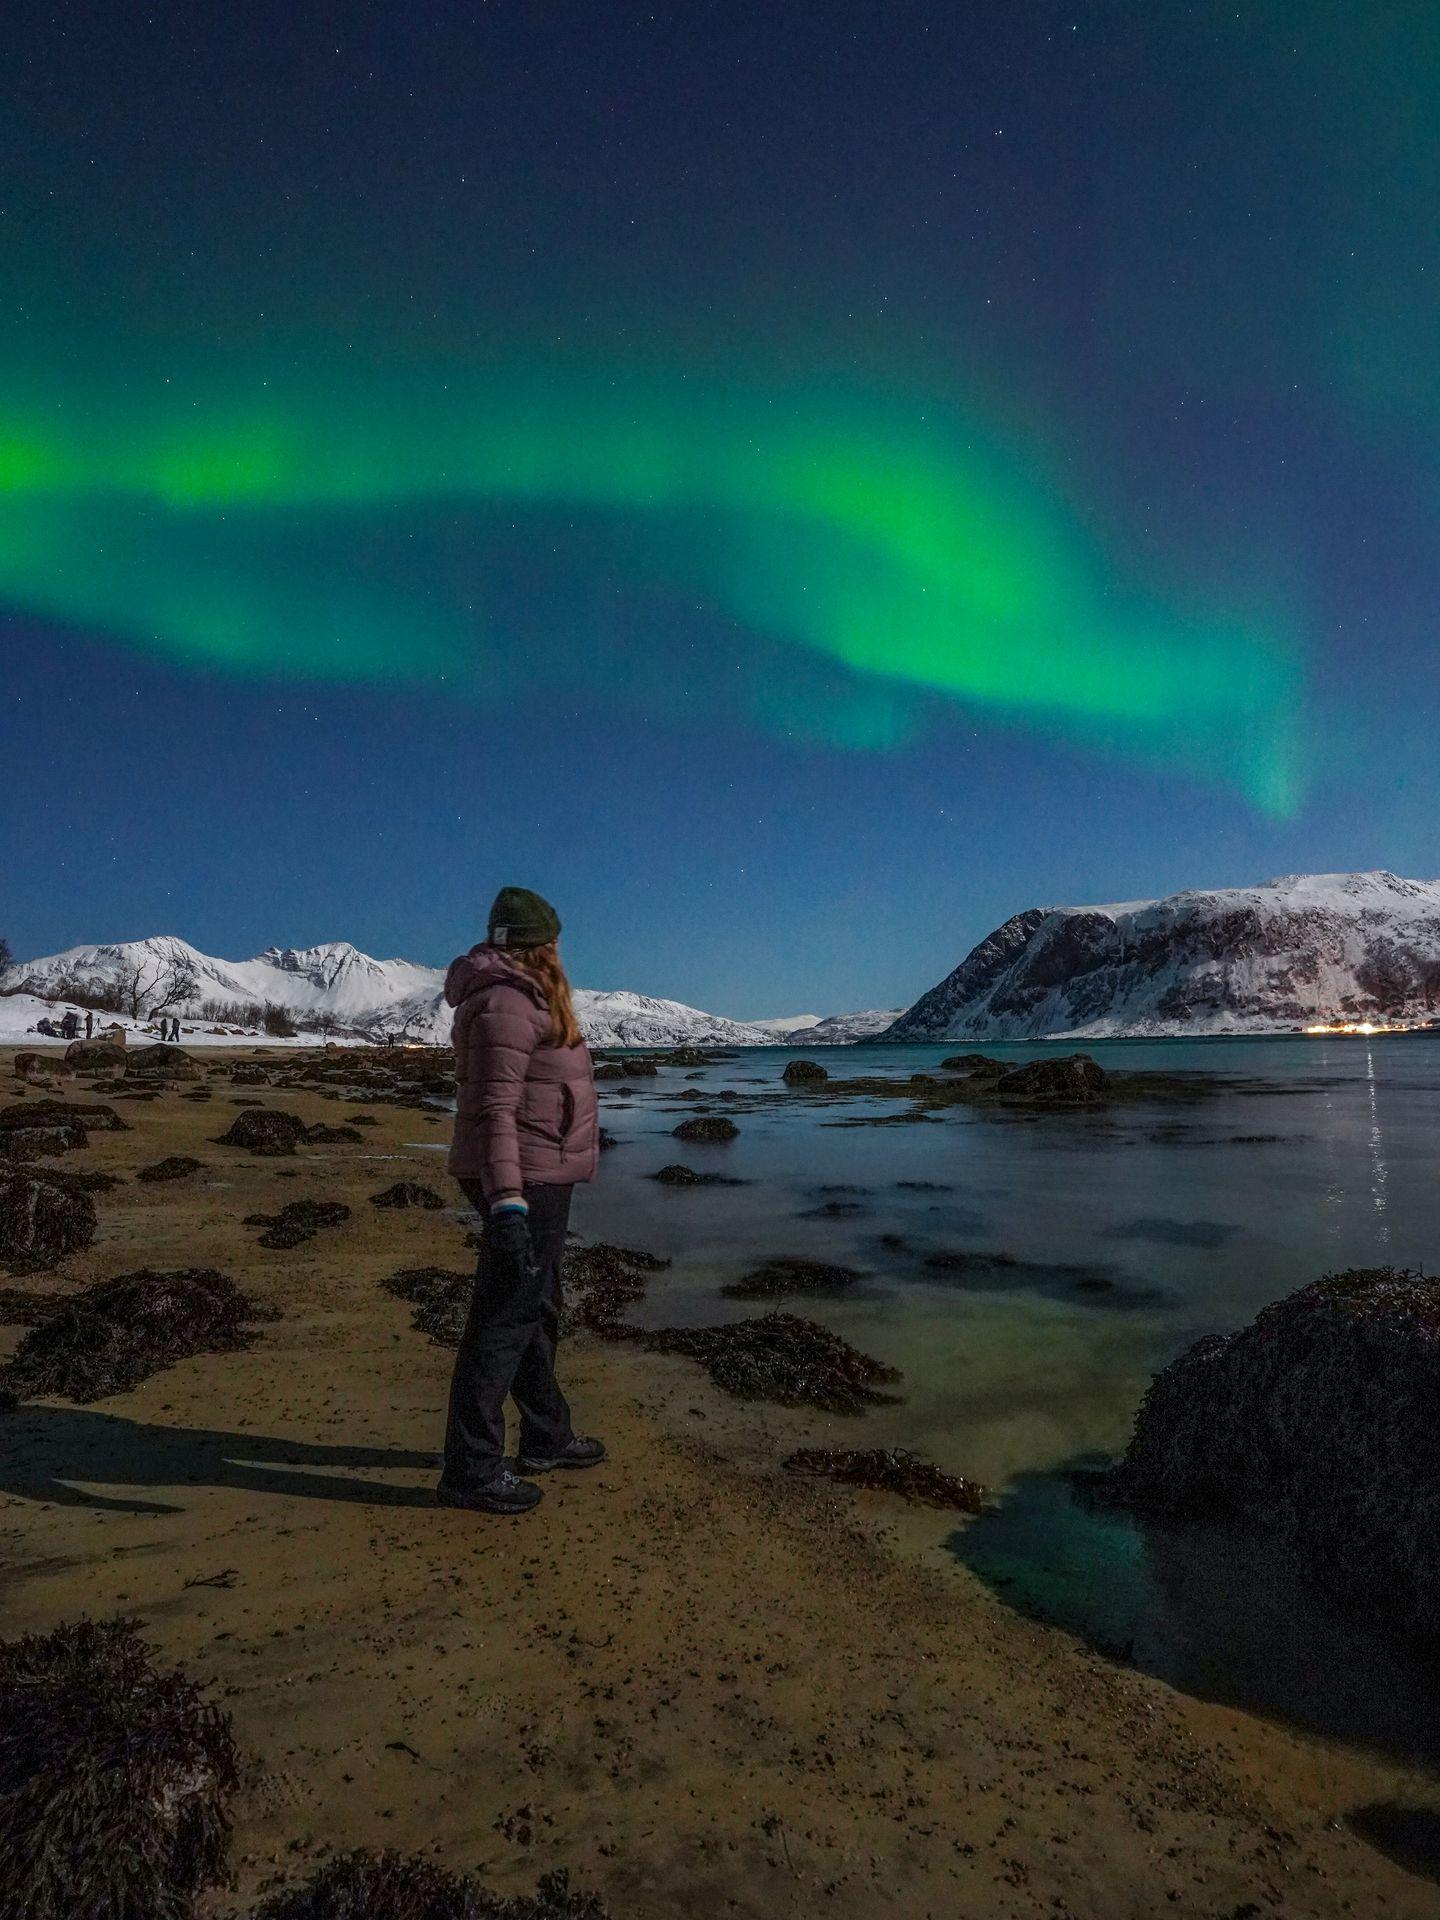 Looking standing on a beach and looking back at the Northern Lights in the distance.